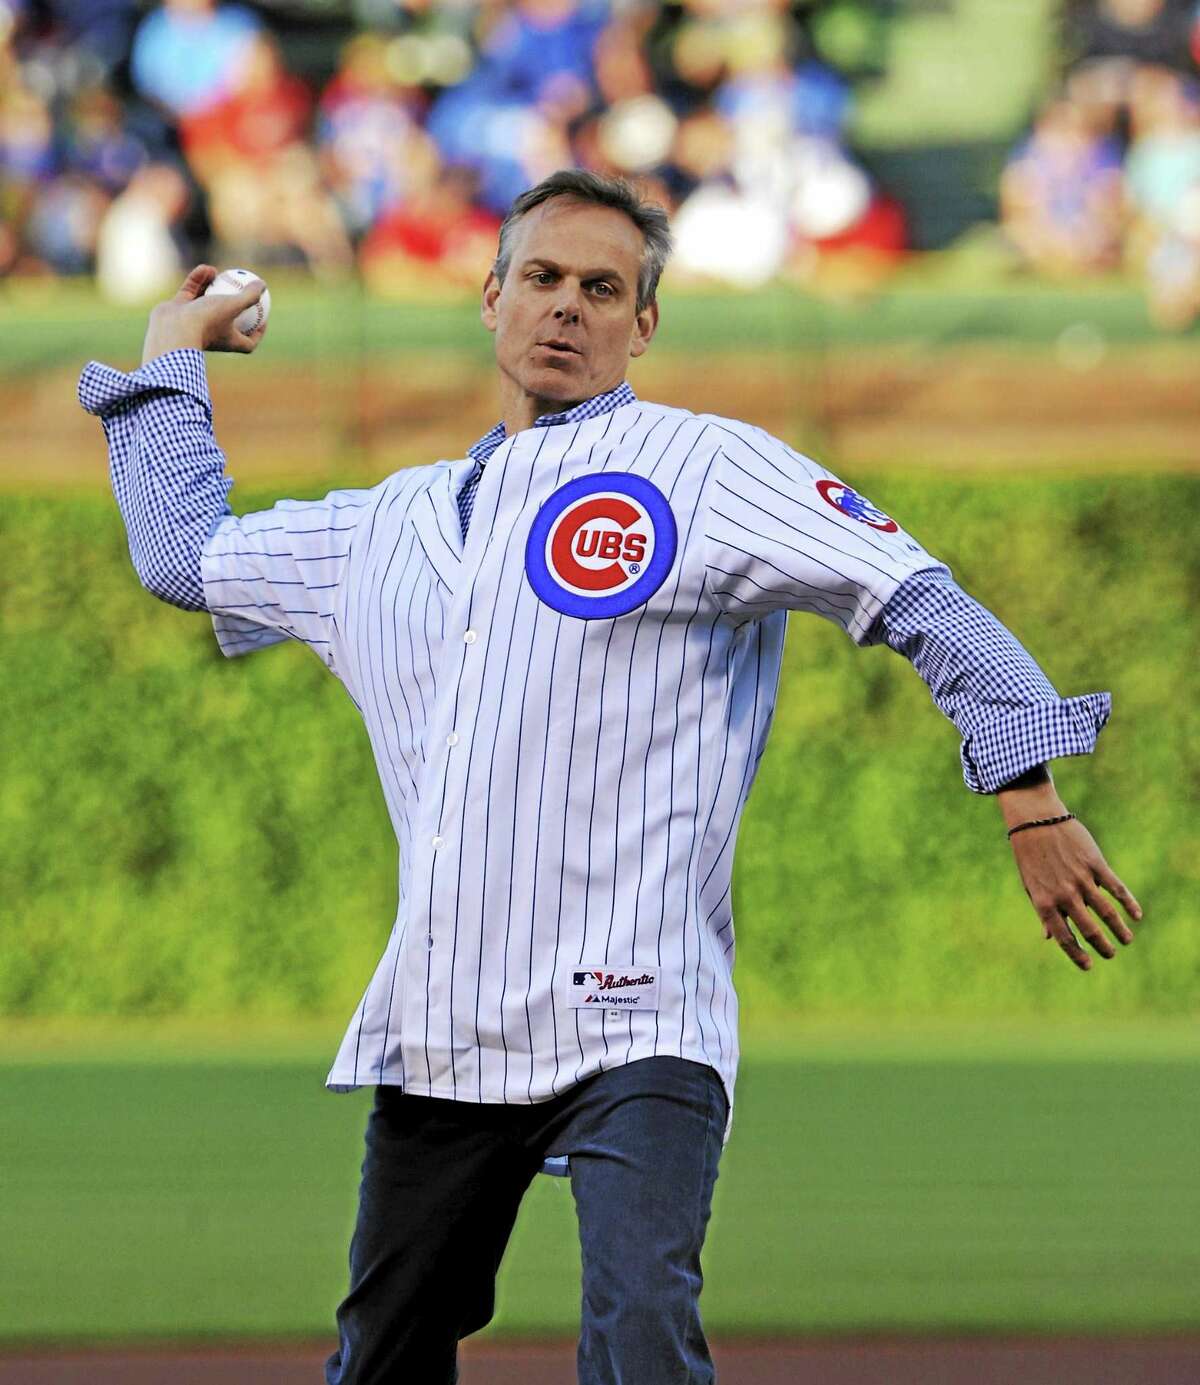 Colin Cowherd tosses out the first pitch before a Reds-Cubs game in 2013 in Chicago.